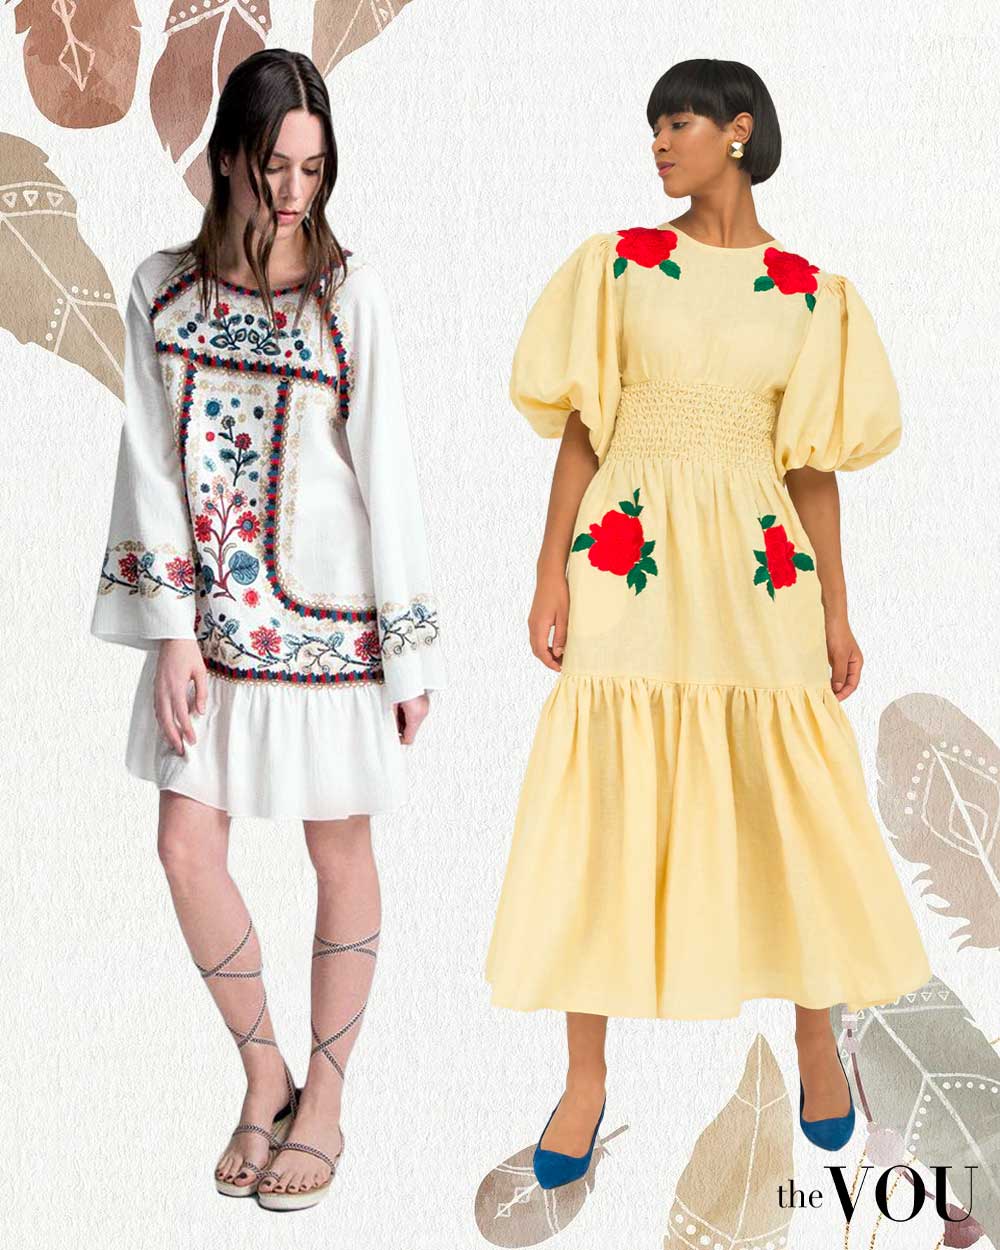 Boho Style Clothing With Embroidered Accents